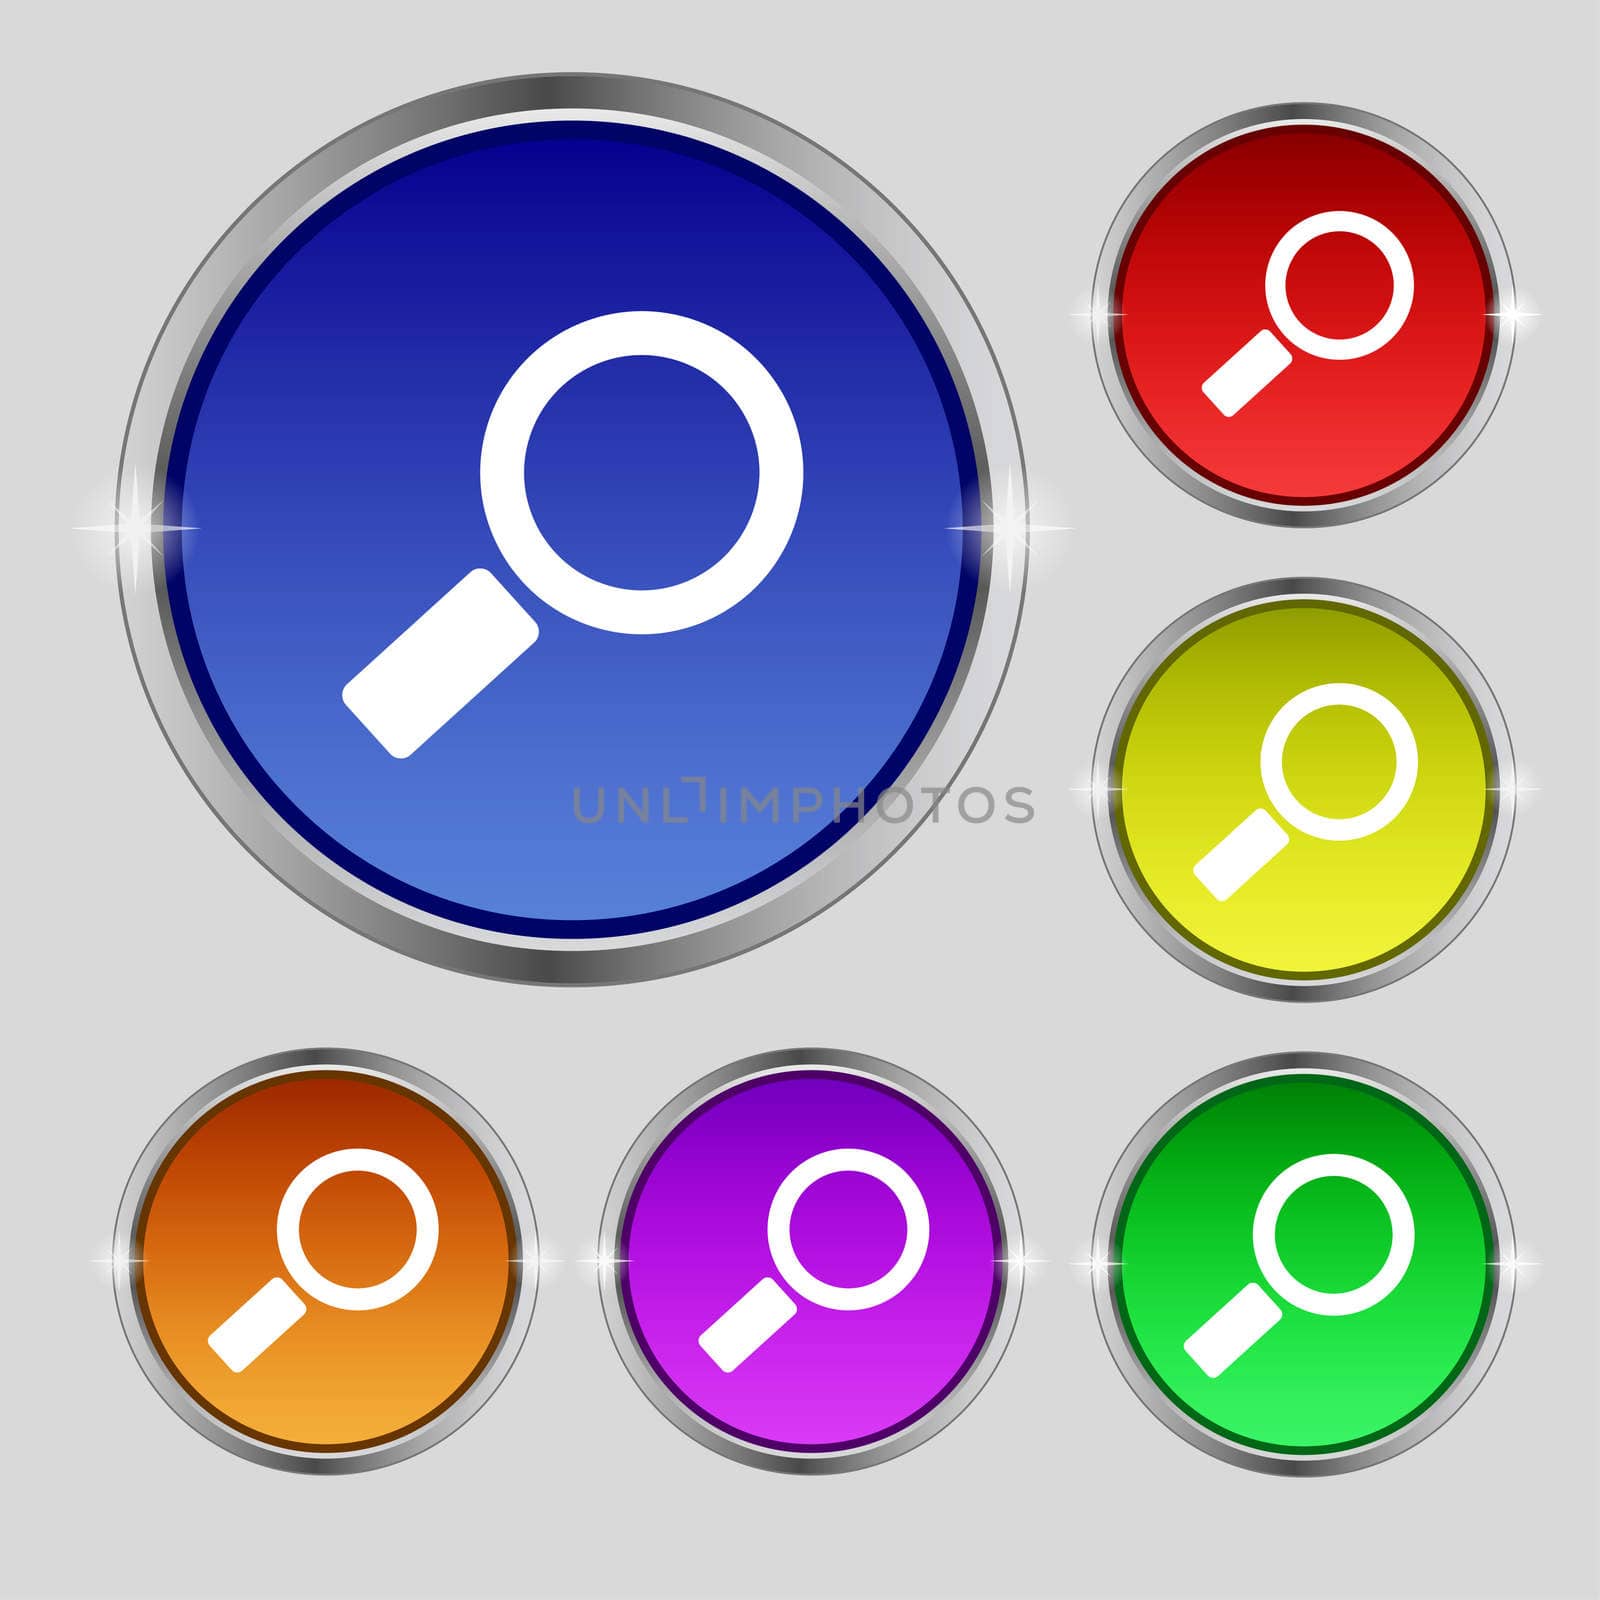 Magnifier glass sign icon. Zoom tool button. Navigation search symbol. Set colourful buttons illustration